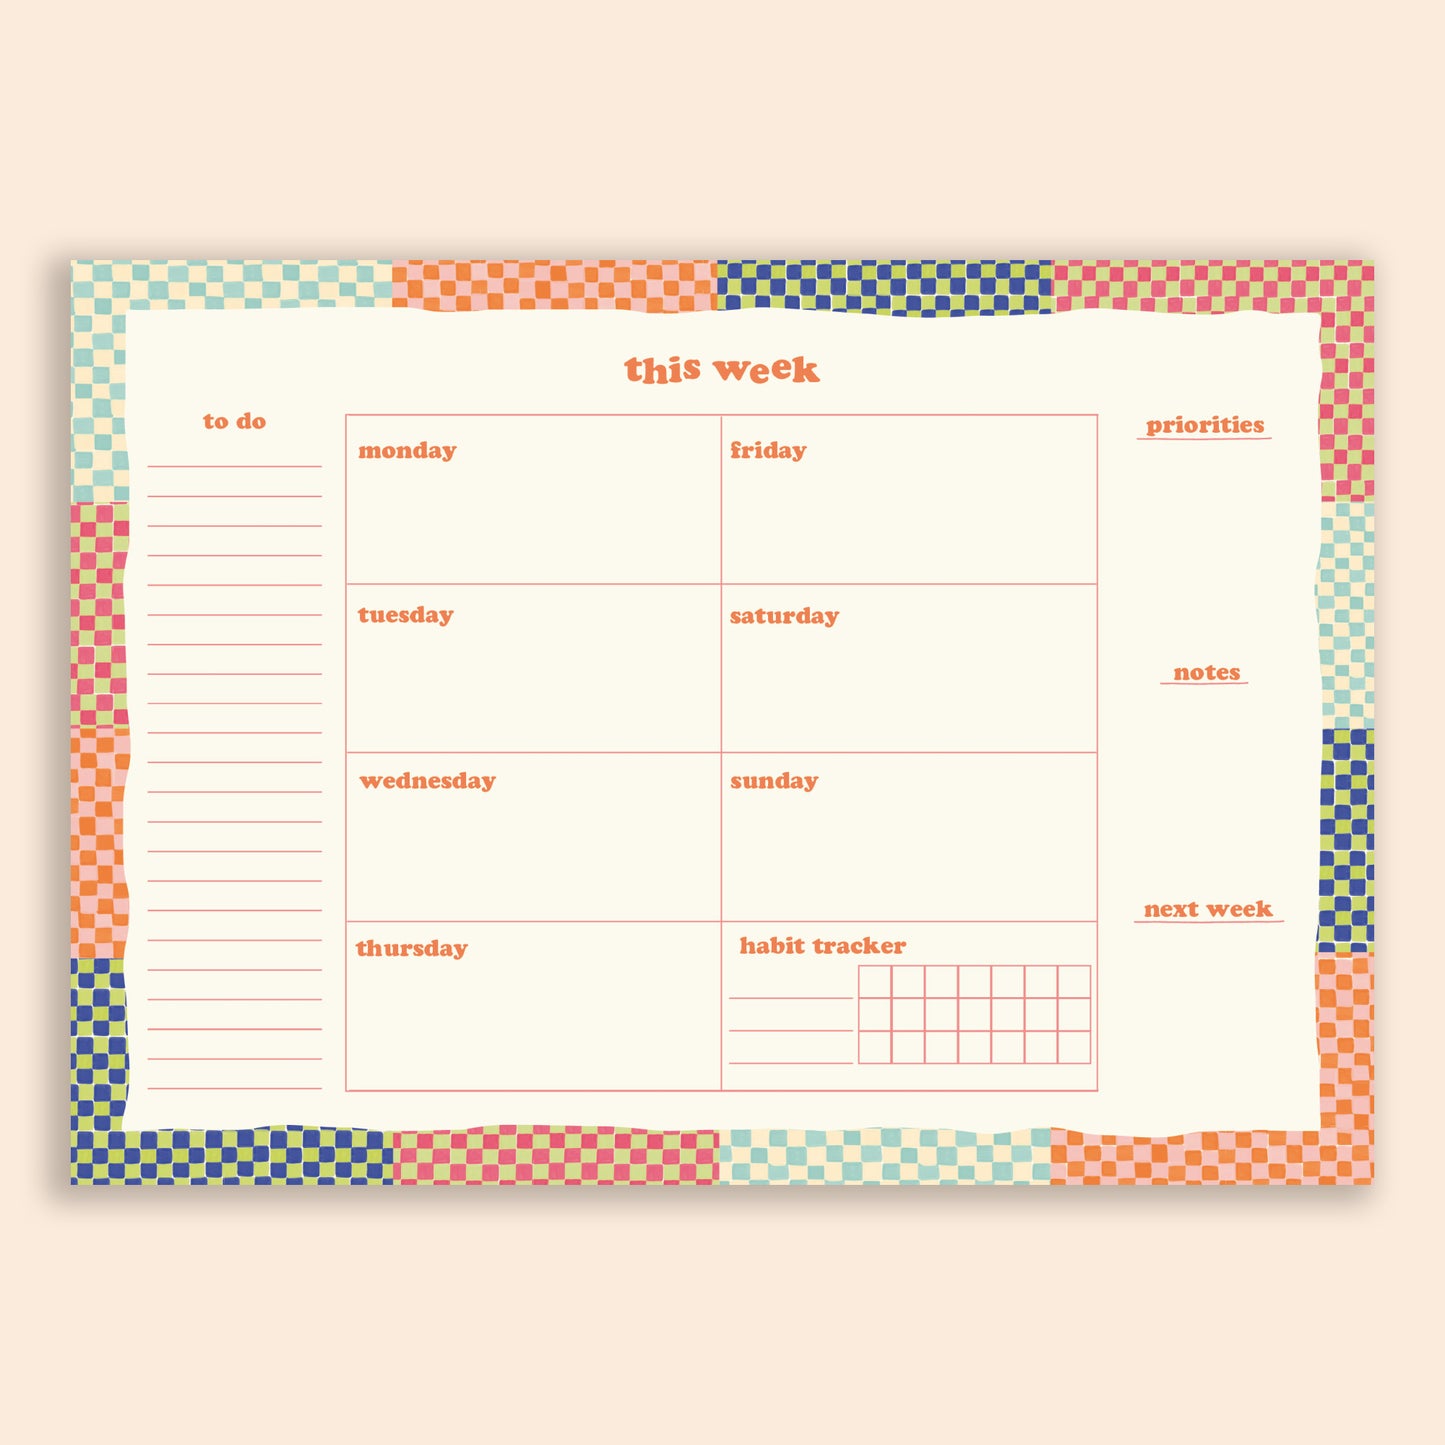 An A4 weekly planner pad on a beige background. The planner has a long to do list on the left, a grid with boxes for each day of the week and a habit tracker in the middle, and headings for priorities, notes and next week on the right. The planner has a multi coloured checkerboard border.